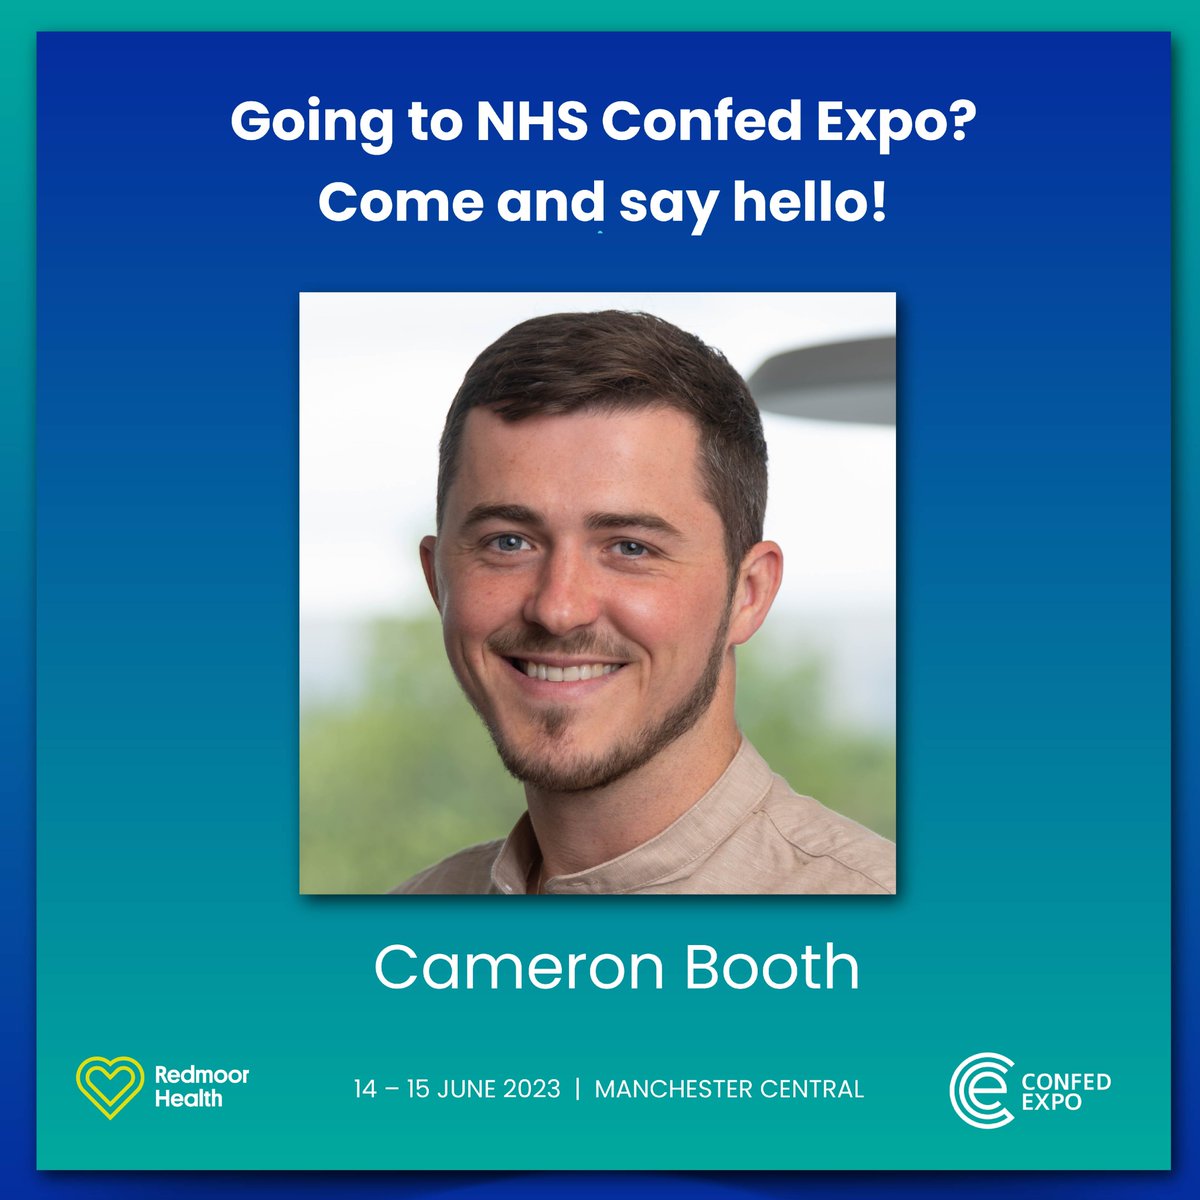 Redmoor Health is proud to be exhibiting at the NHS Confed Expo on June 14-15 in Manchester. Visit us at stand D9 to see how we're transforming primary care. 

#NHSConfedExpo #PrimaryCare #GeneralPractice